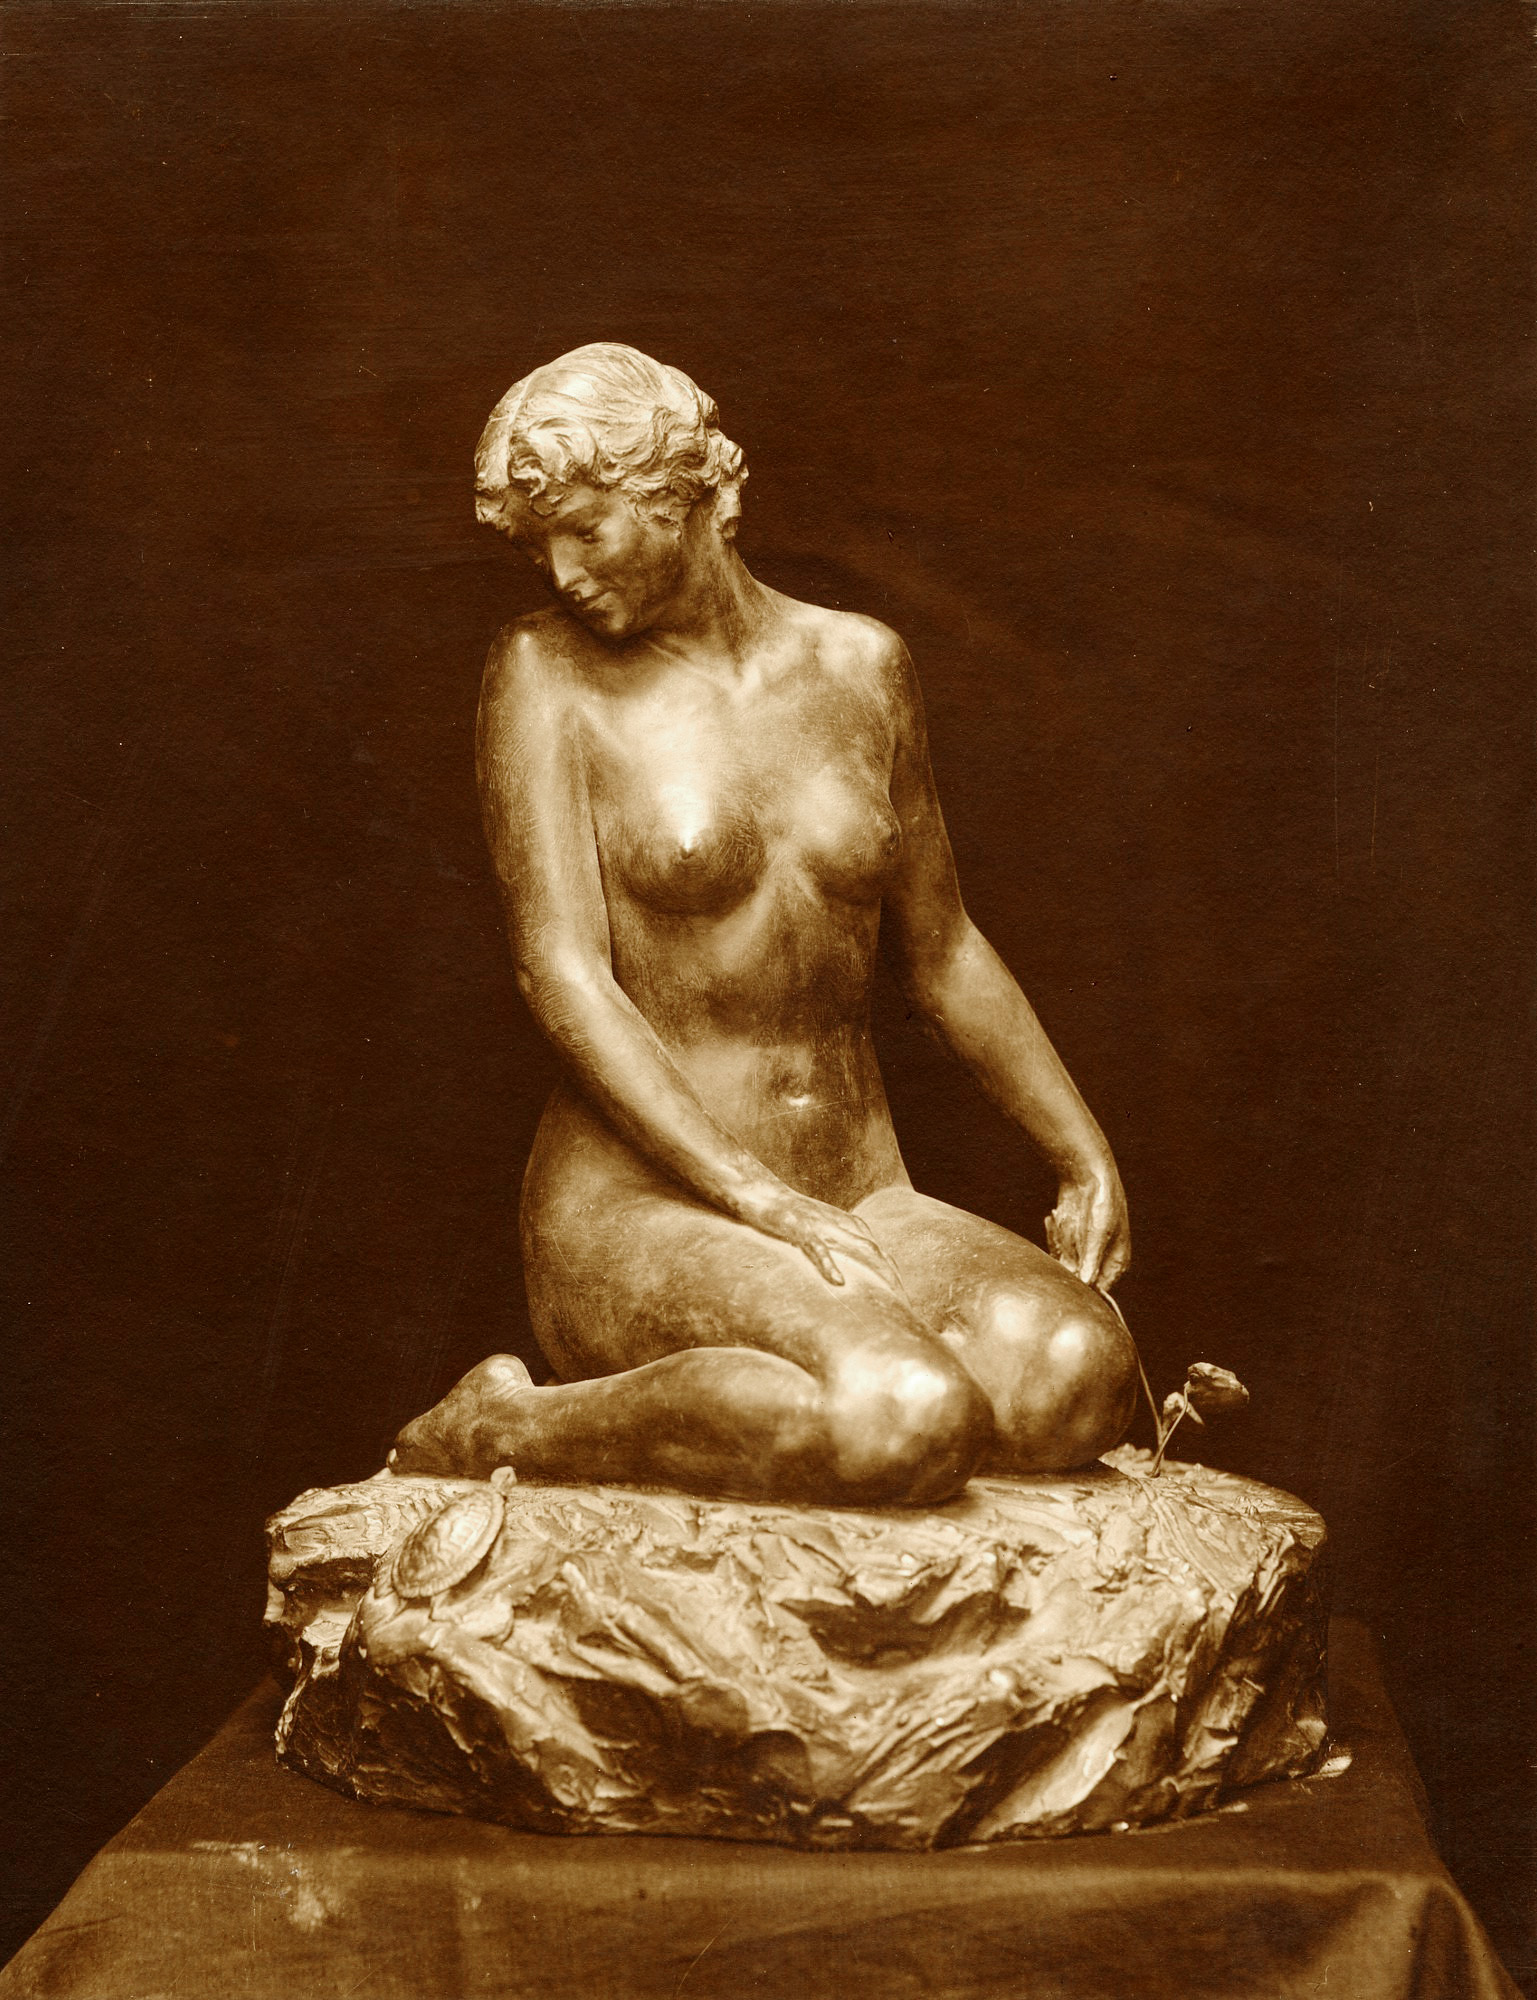 Hahlo-139, The Lily statuette